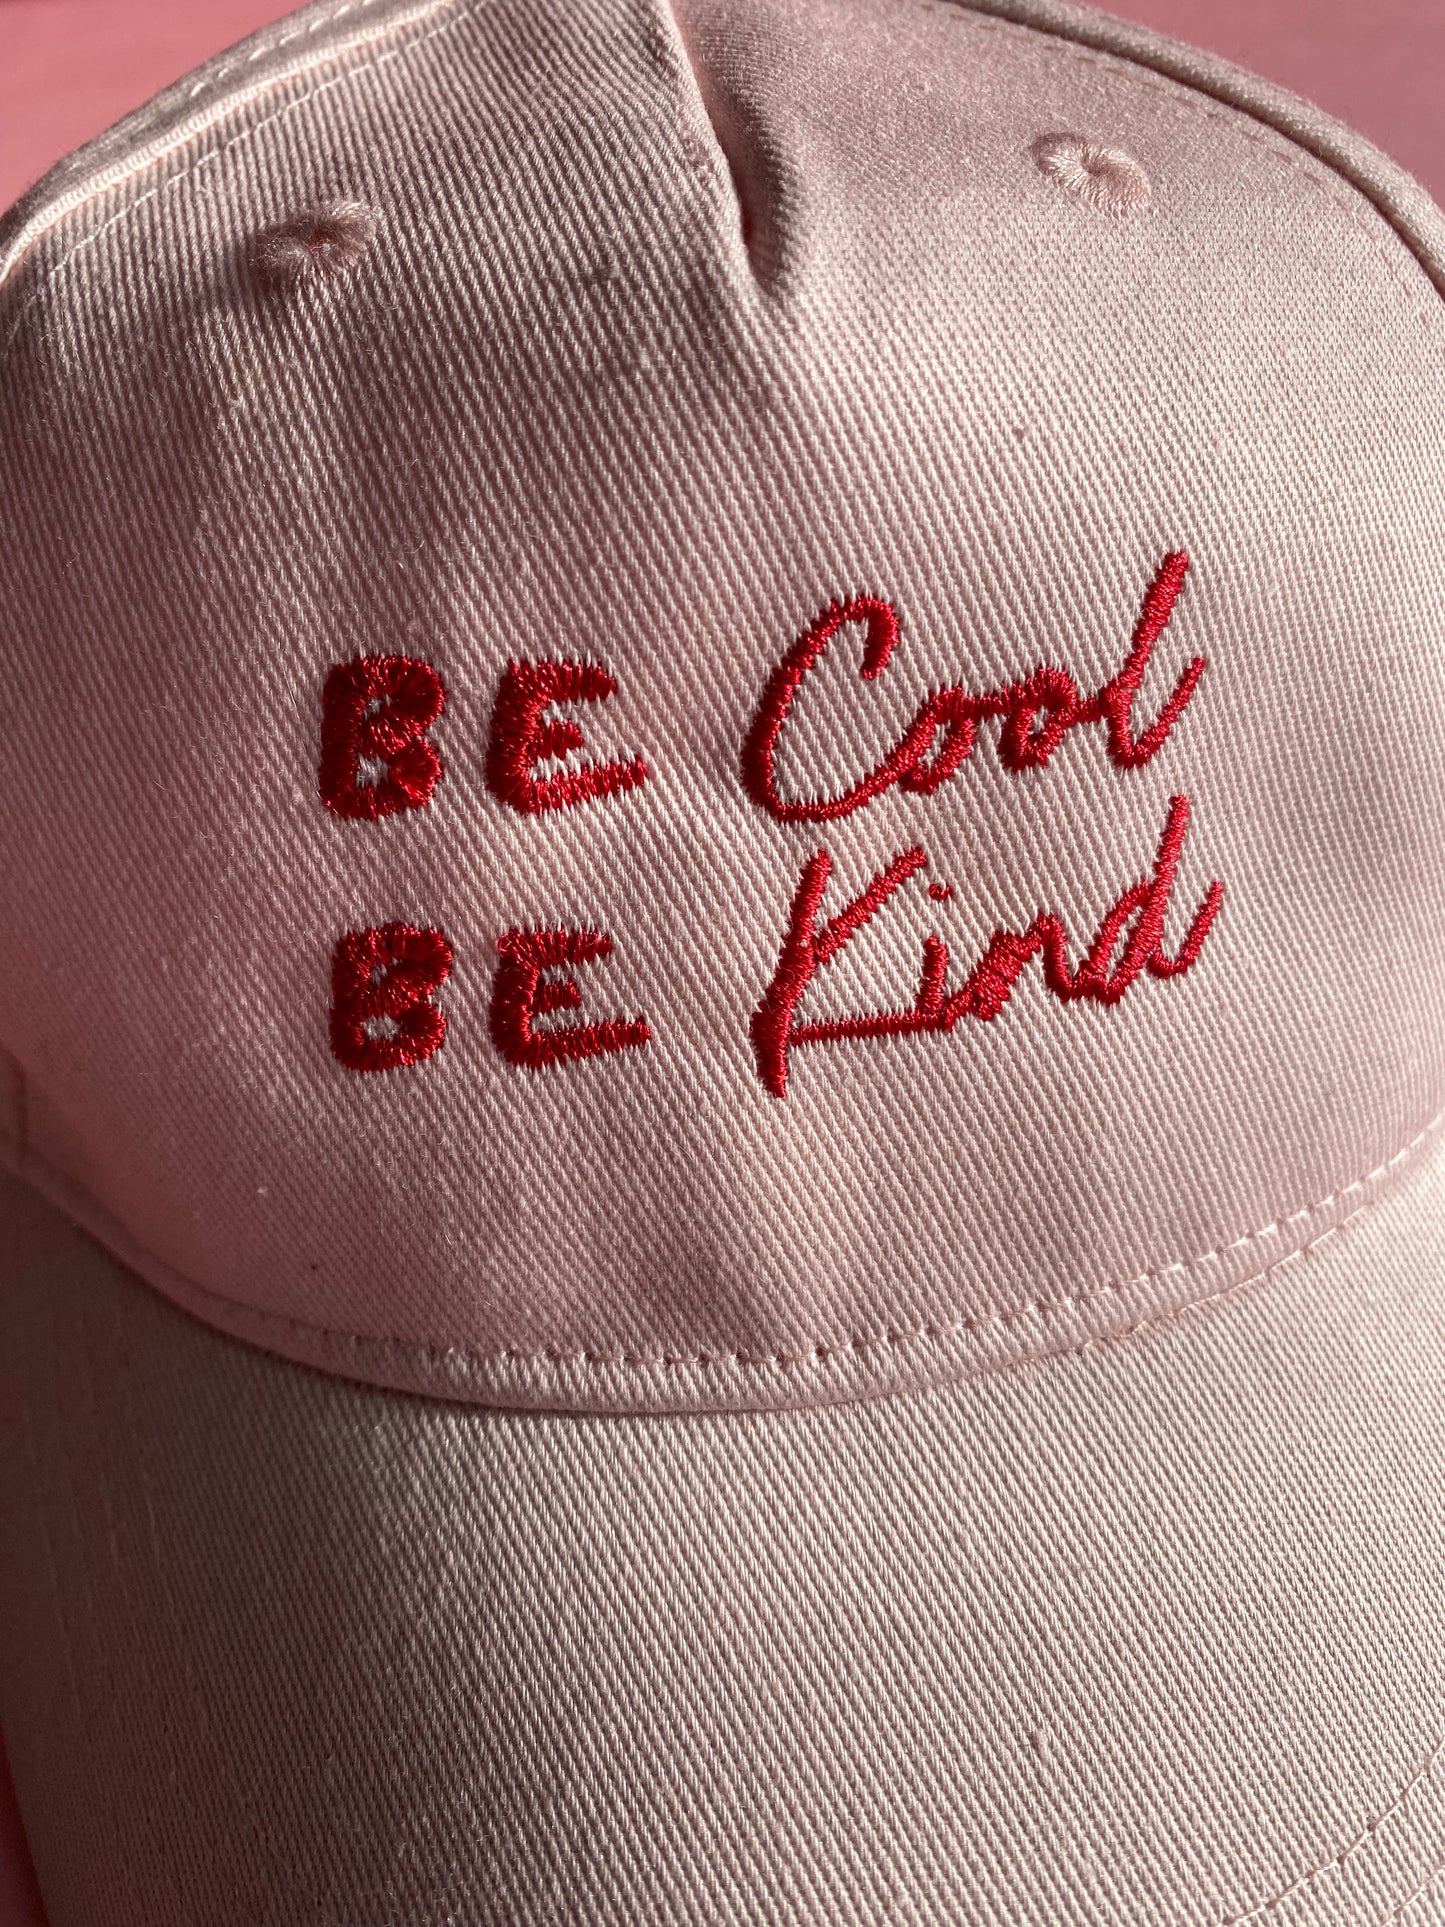 KIDS Be Cool Be Kind Pink Cap - SALE